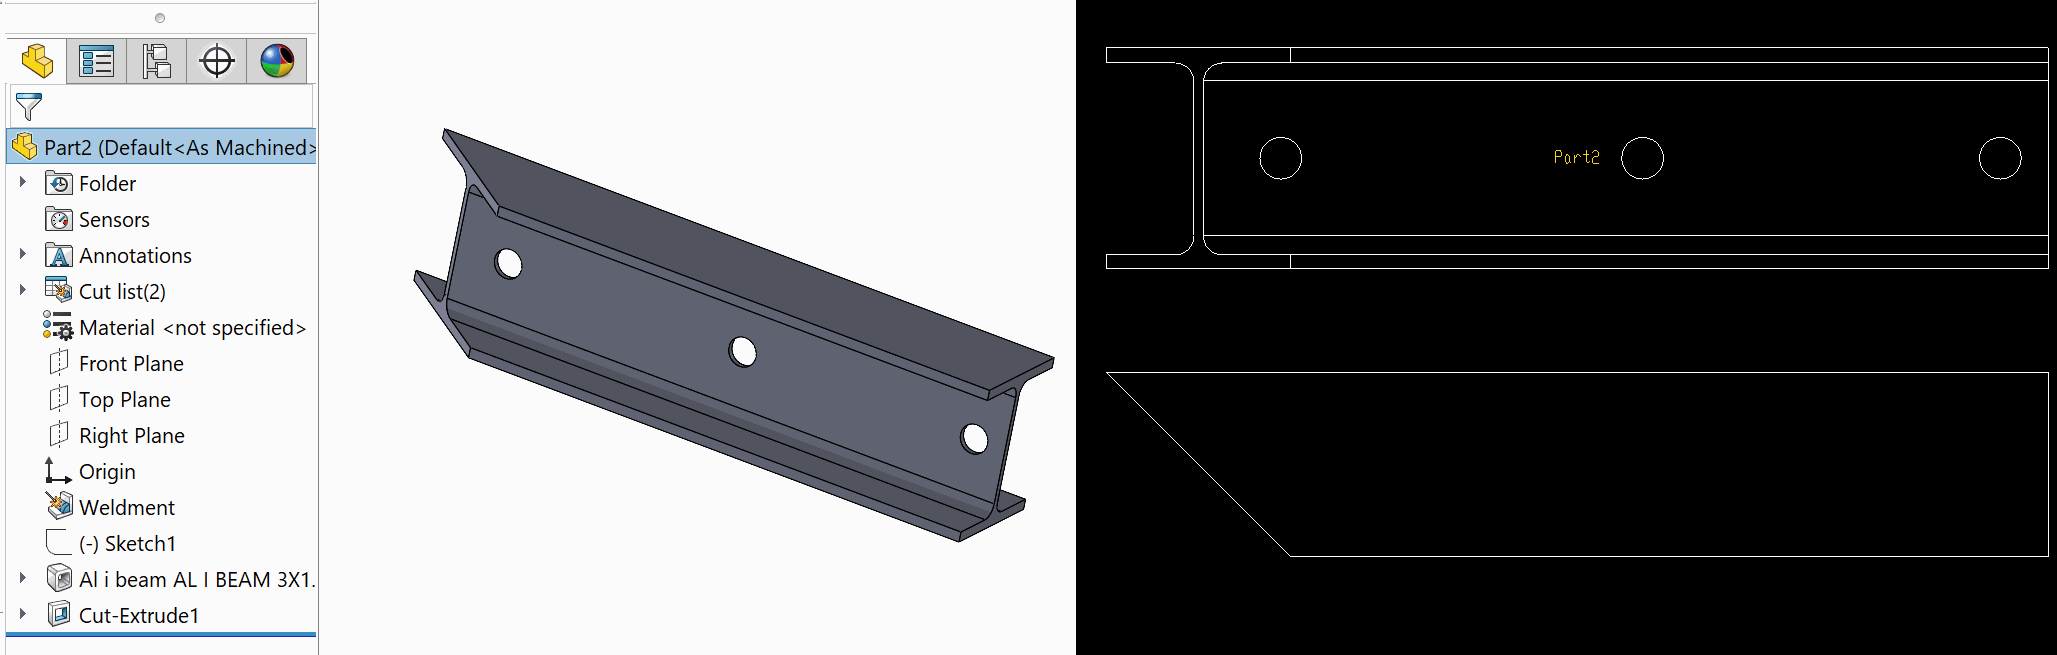 Flat pattern output for a weldment body